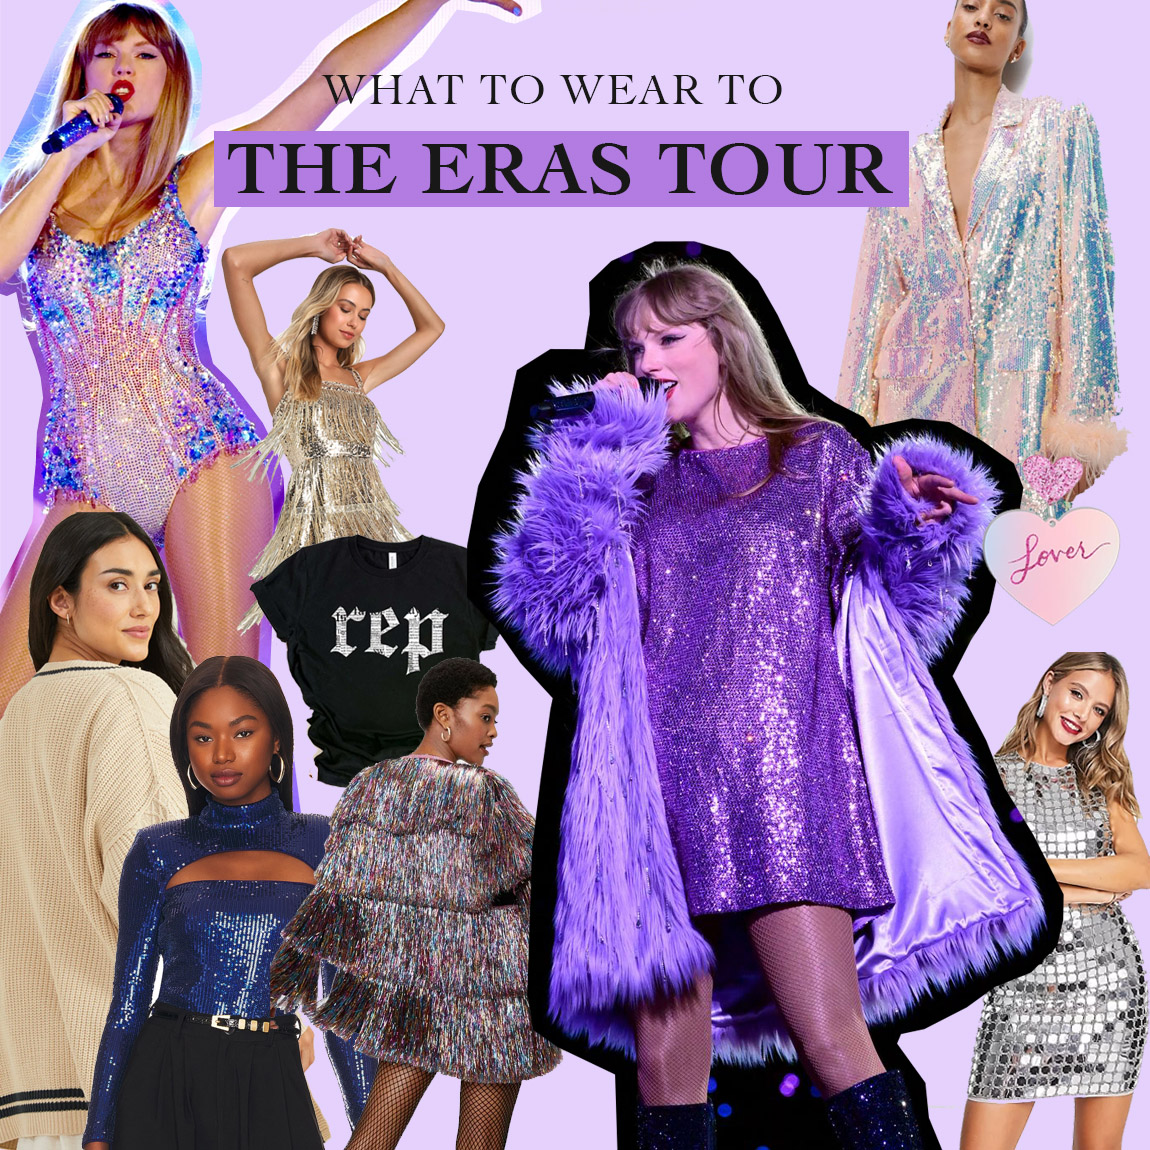 40 Show-Stopping Taylor Swift Eras Tour Outfits and Ideas